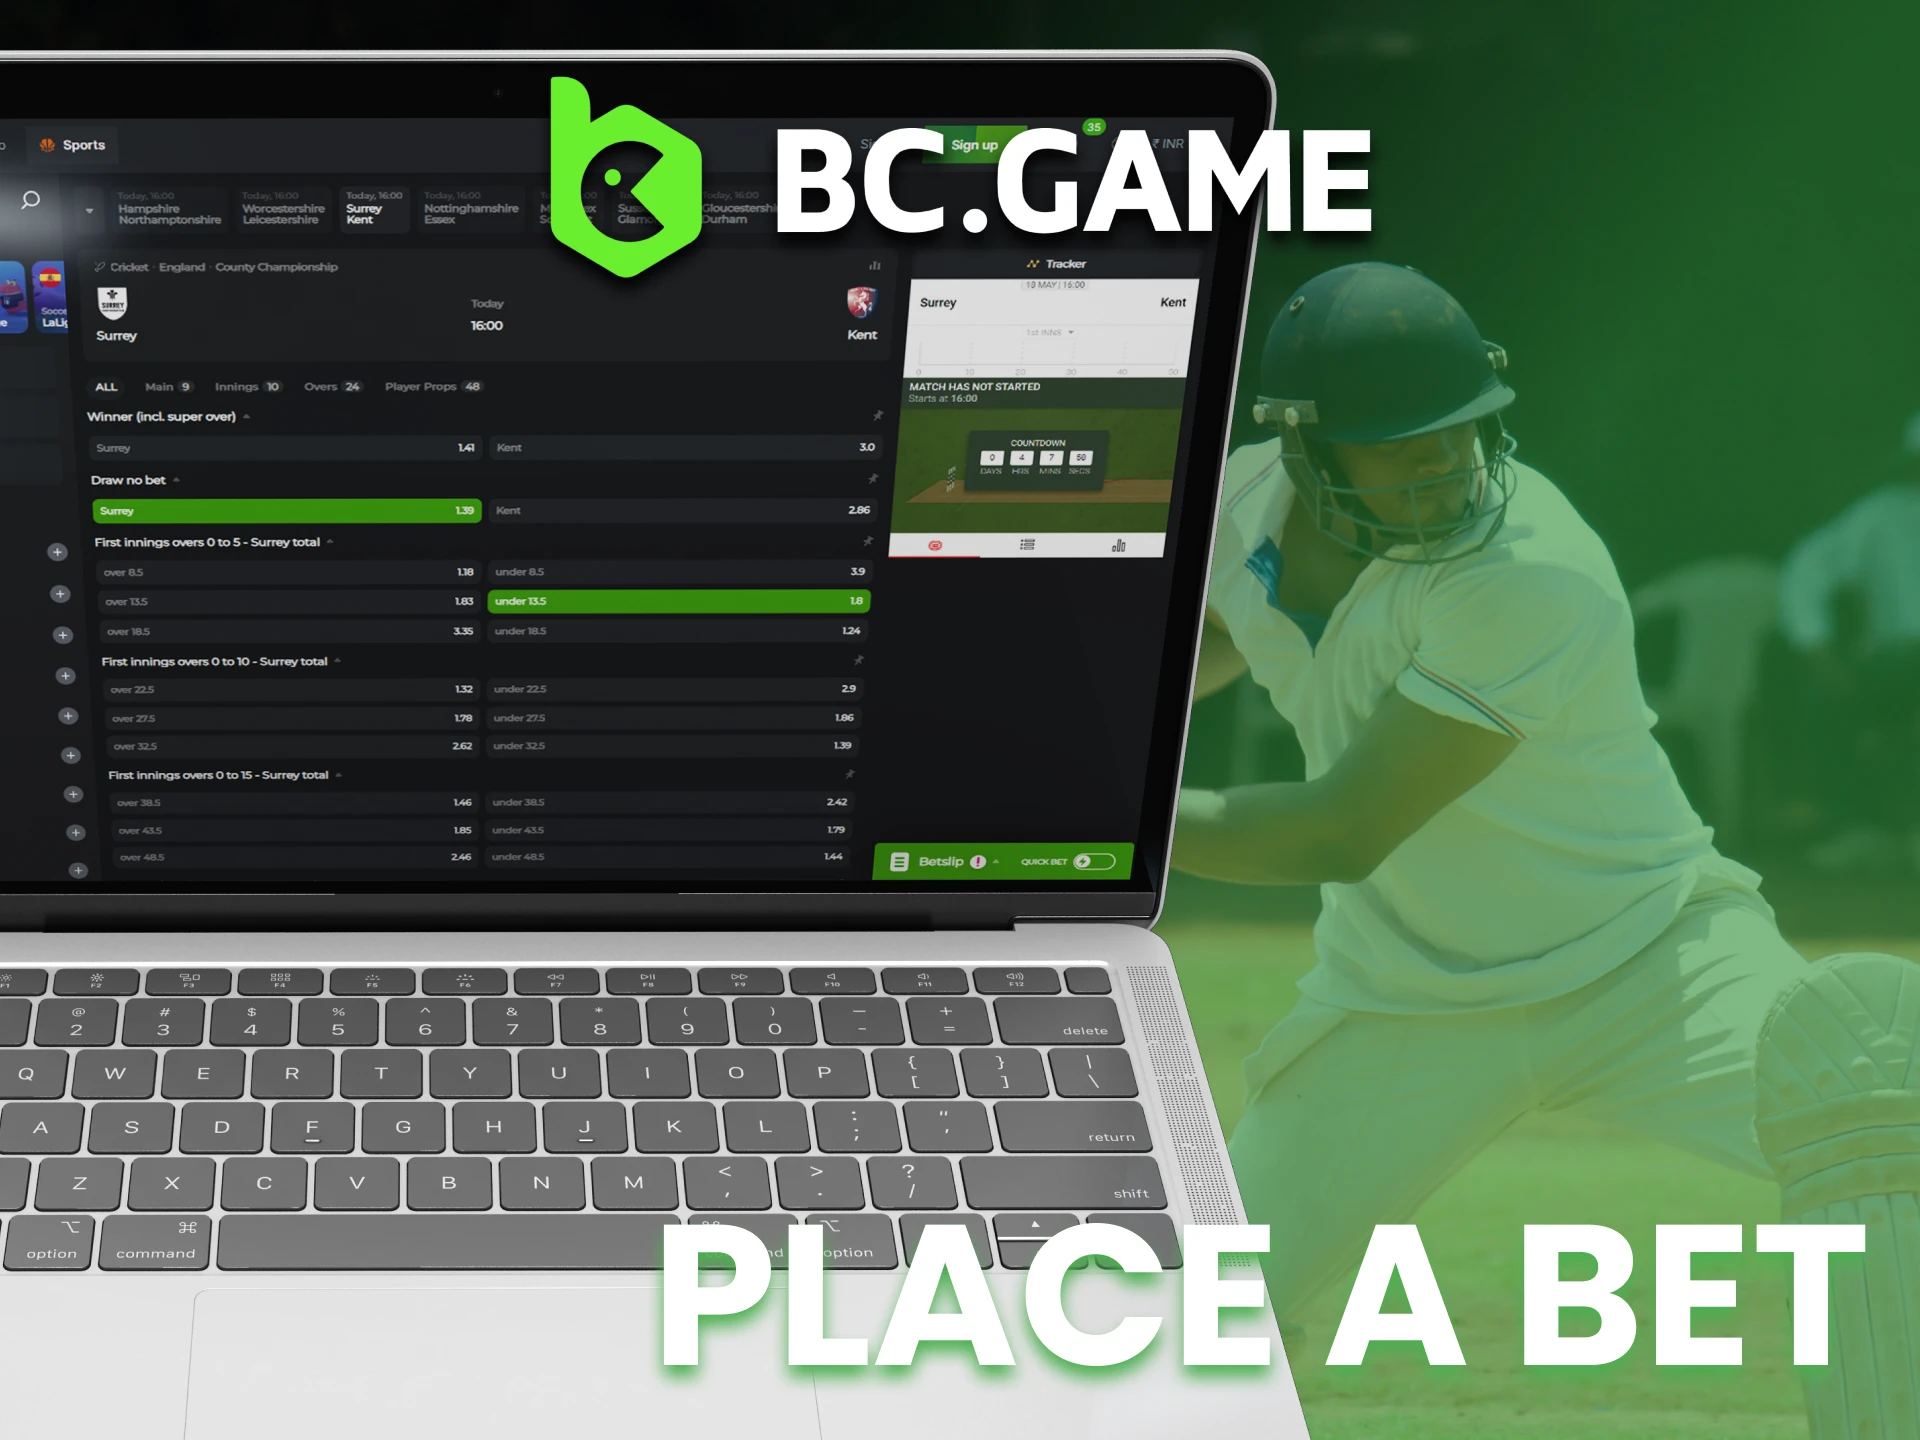 Create your own bet and place it on BC Game betting page.